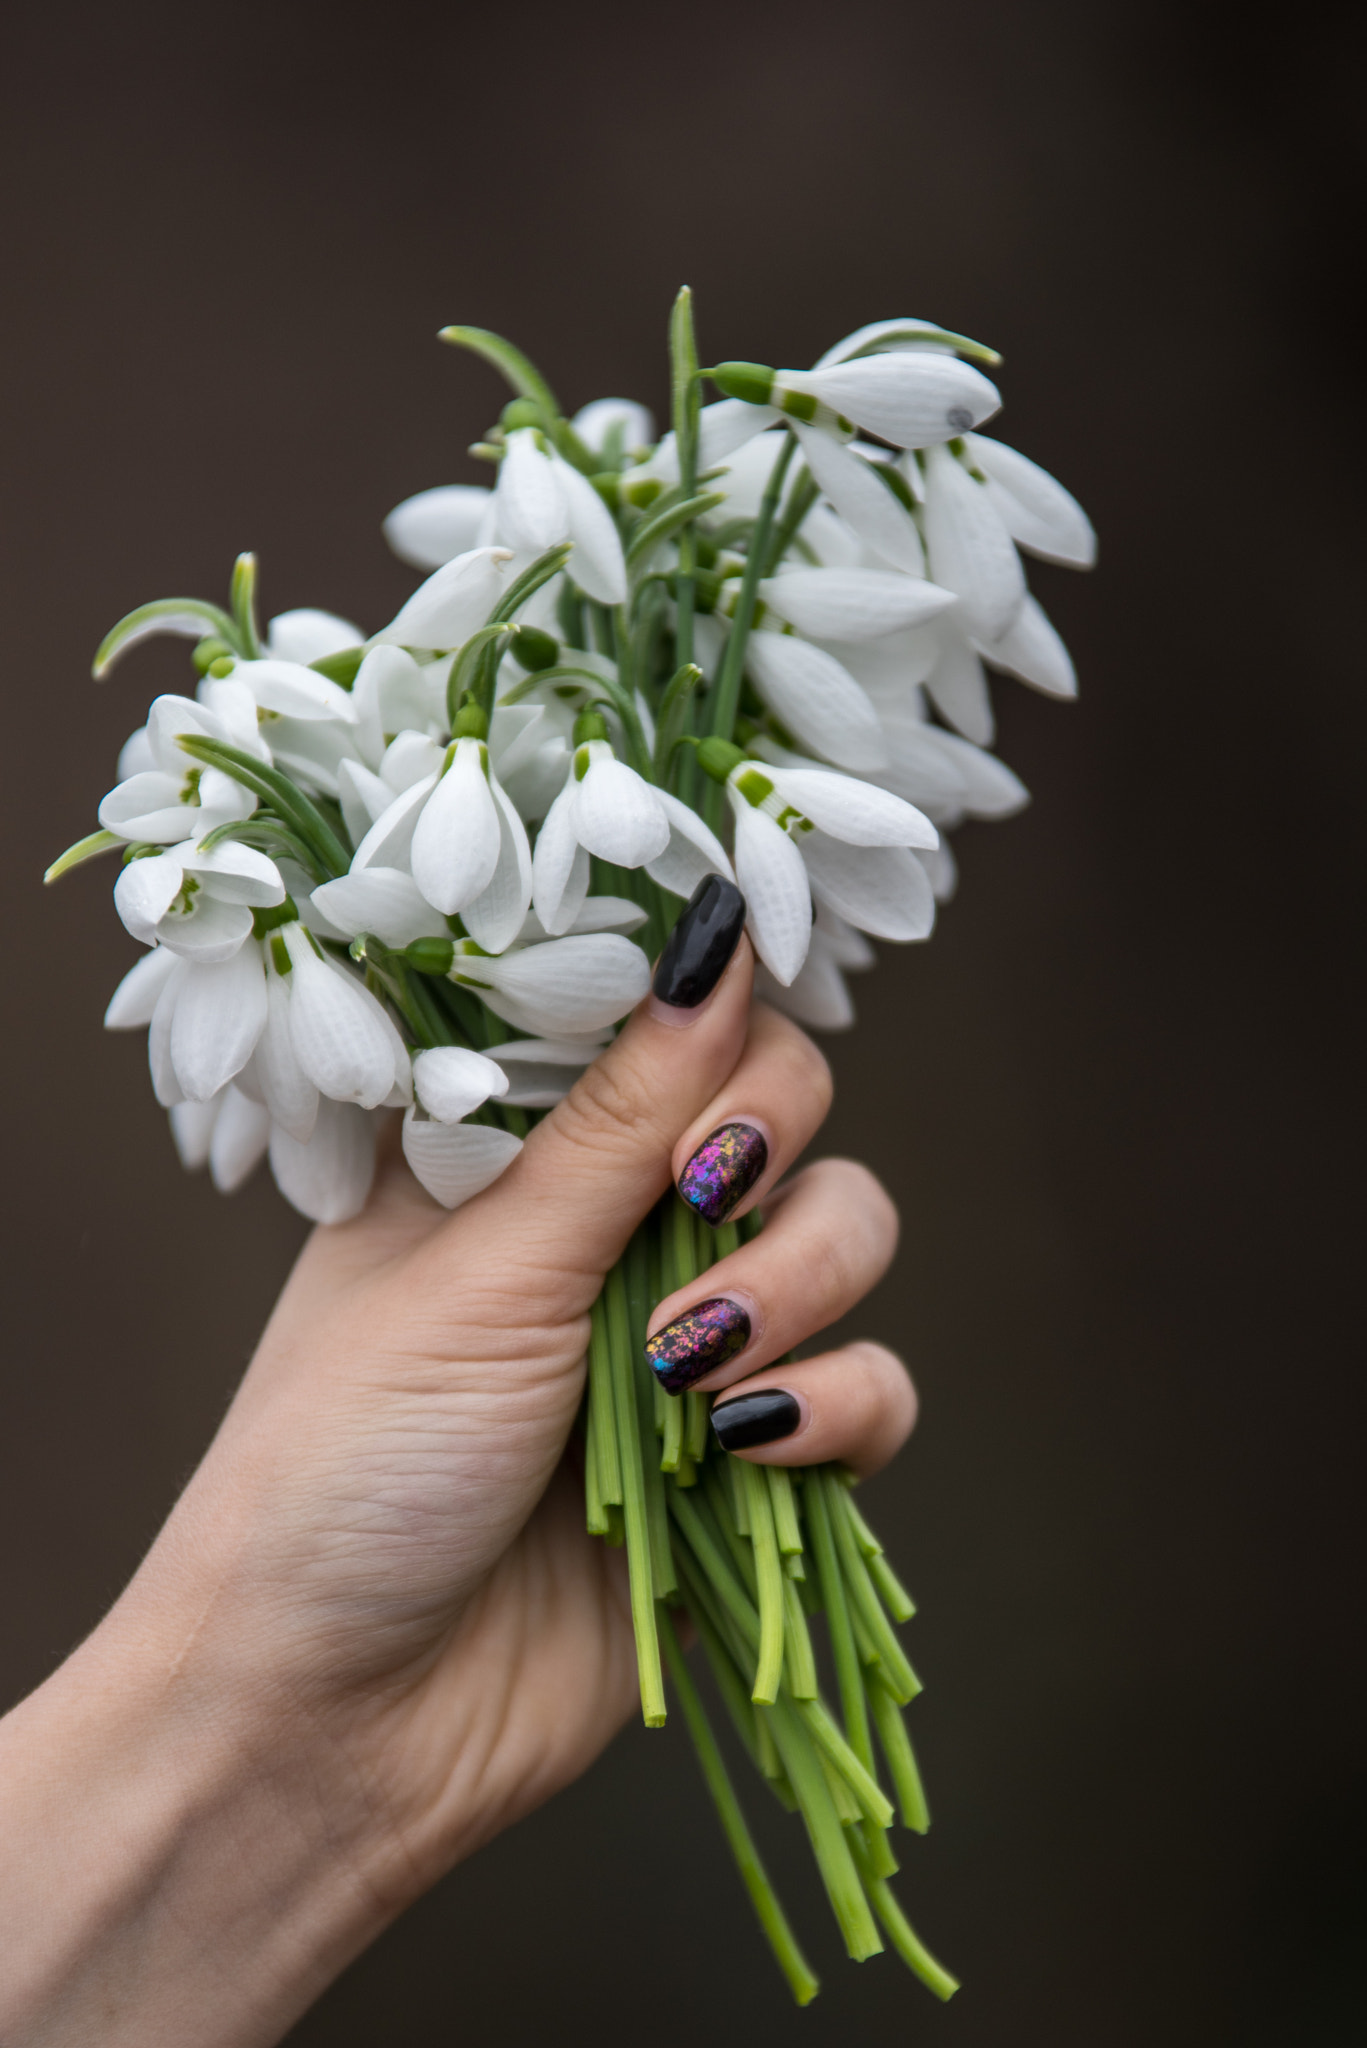 Pentax K-1 sample photo. Snowdrops in girl's hand photography